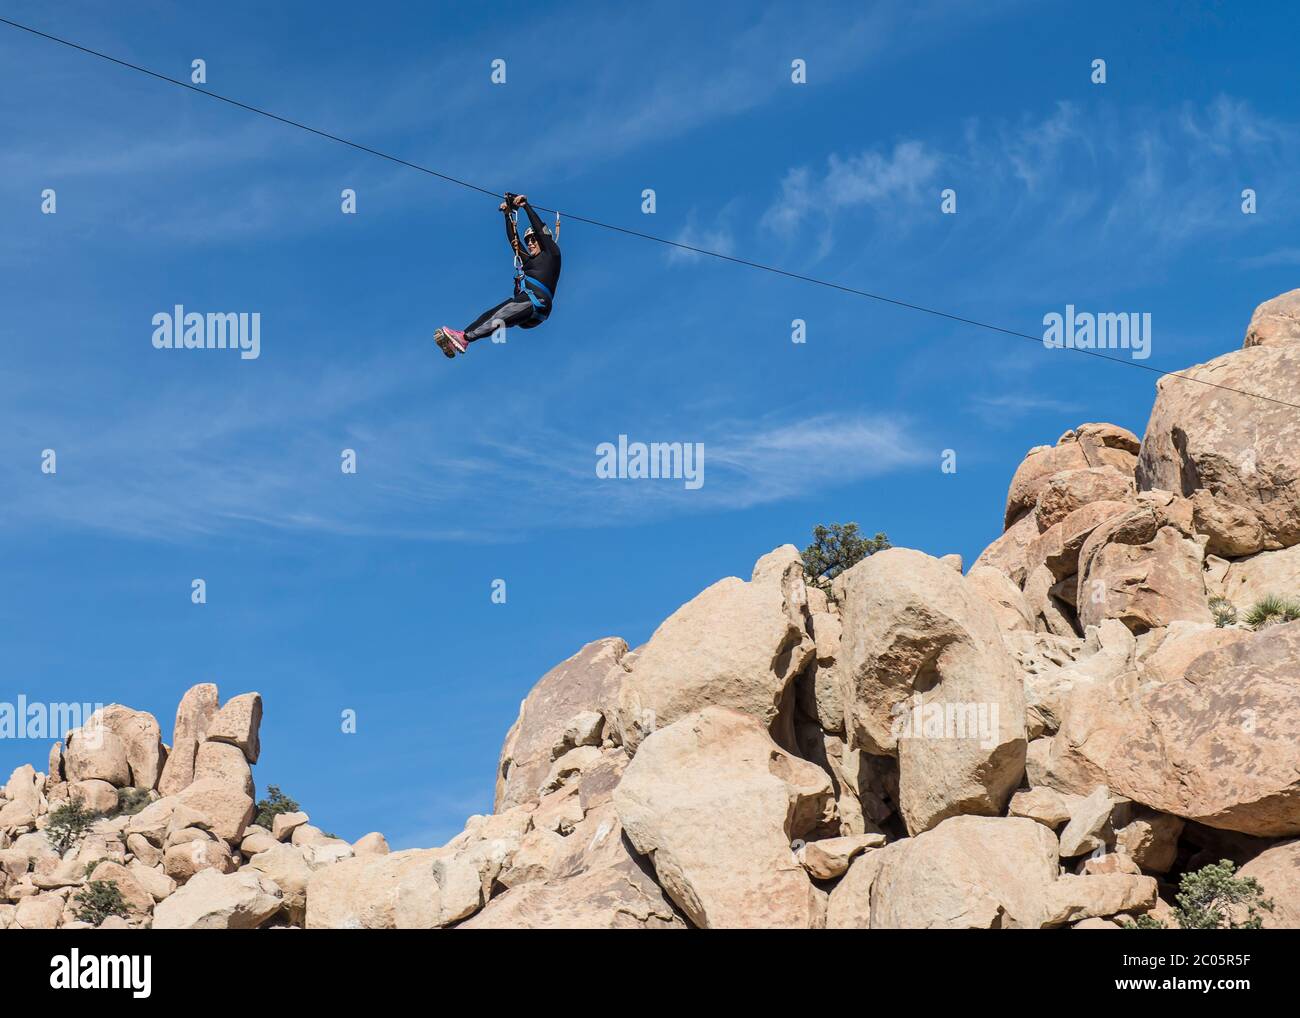 People in the mountains enjoying a zip line in La Rumorosa mountains, as part of a lifestyle and extreme sports concept. Baja California, Mexico. Stock Photo